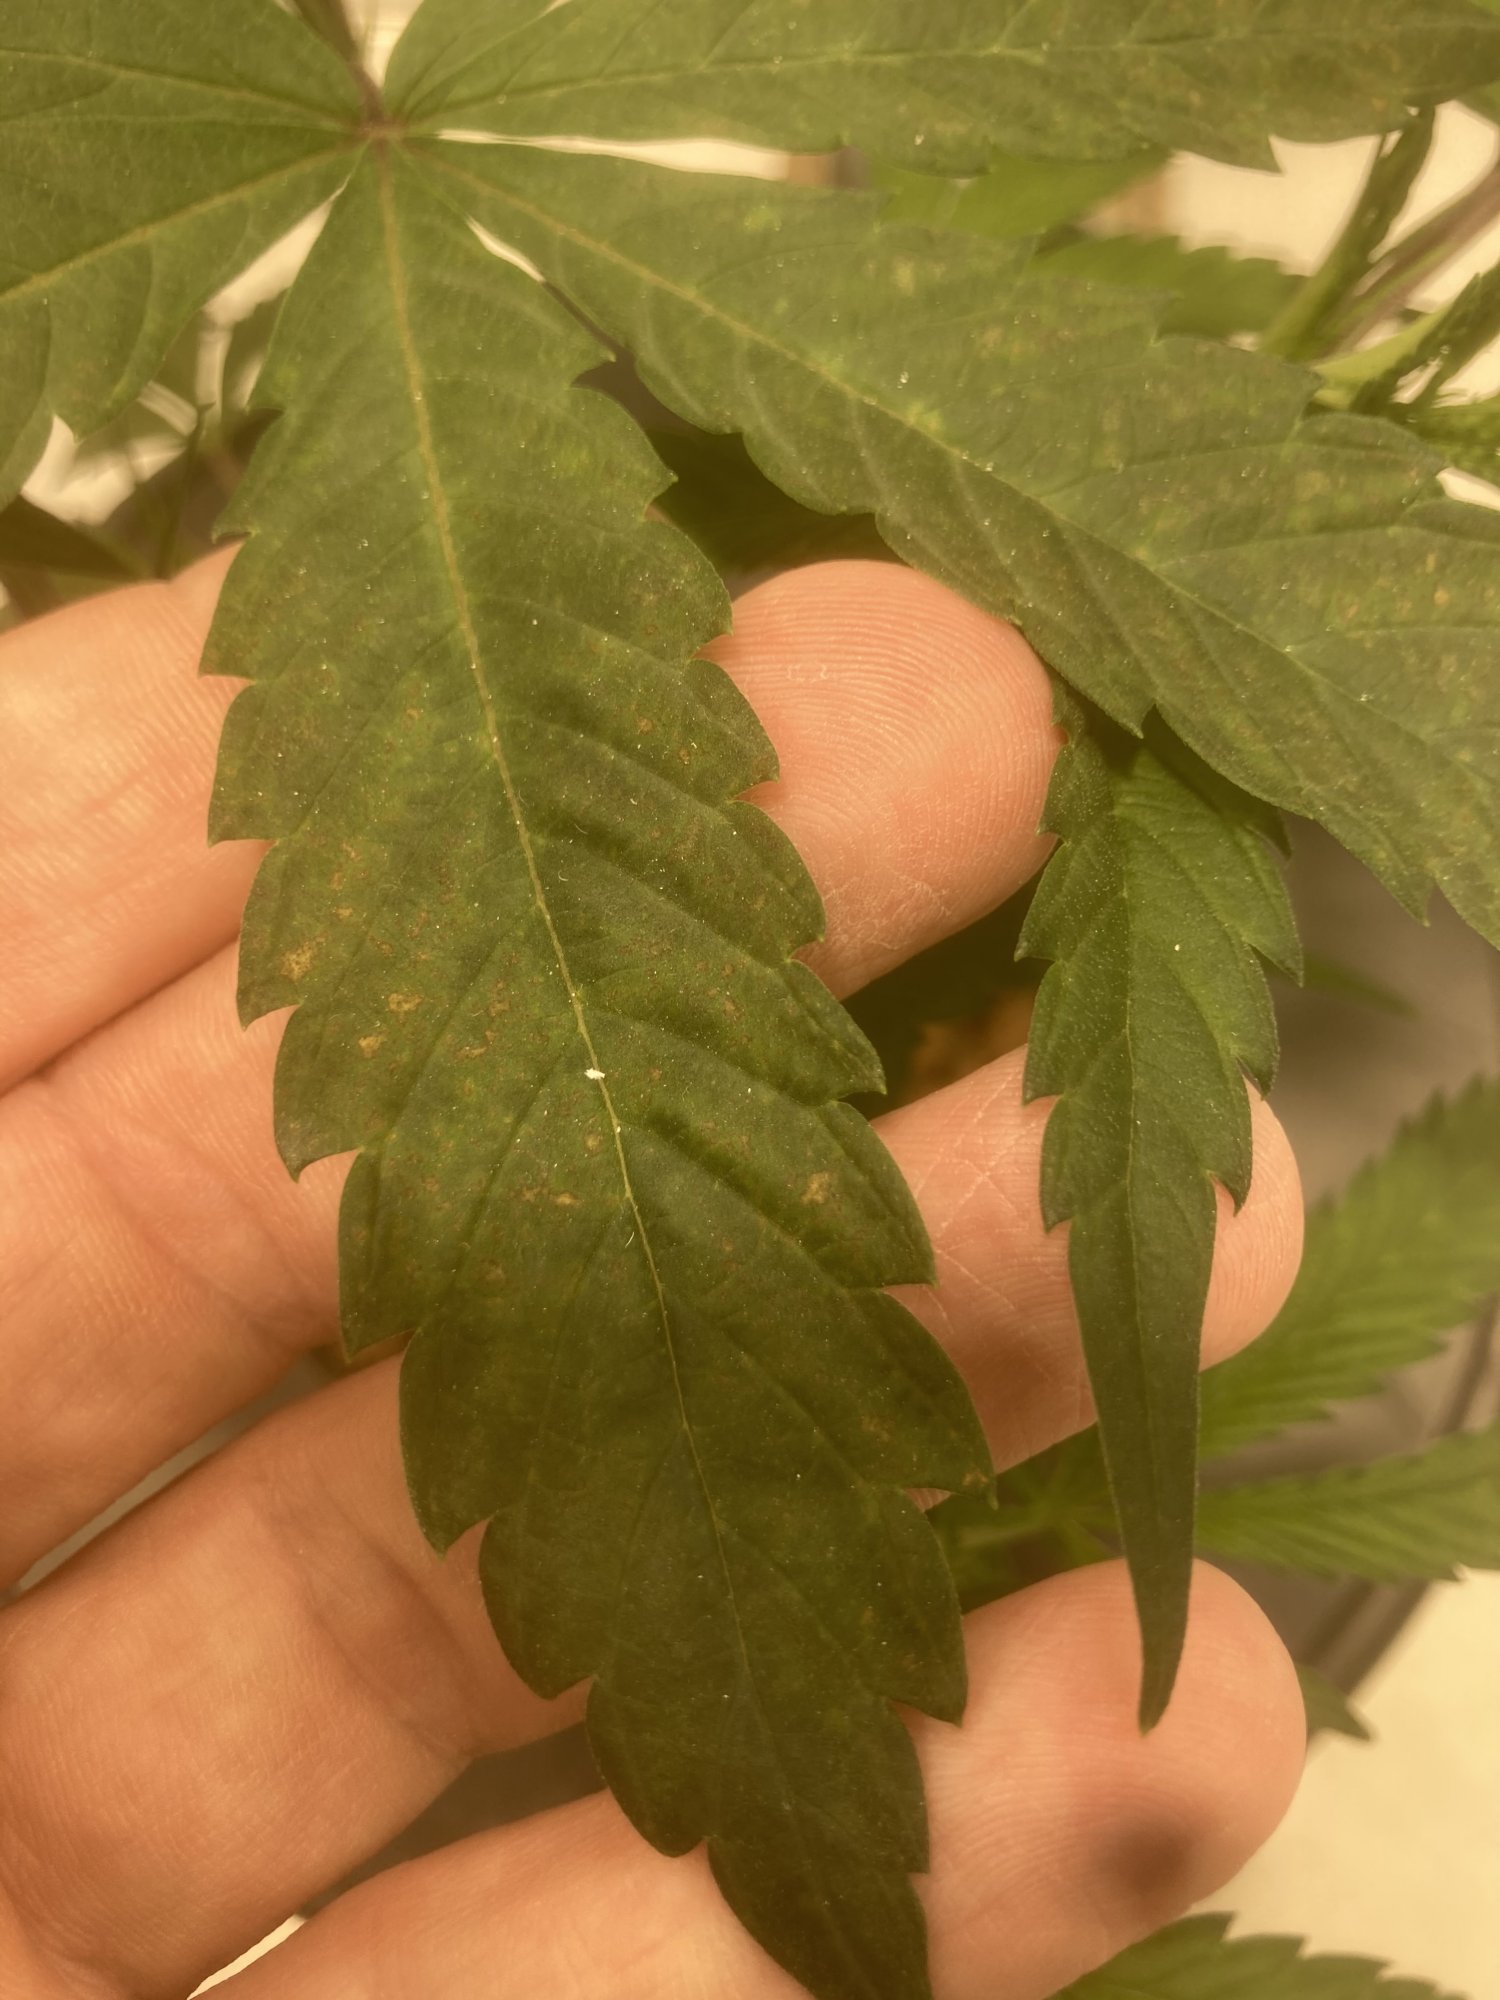 Water nute or ph issue 2